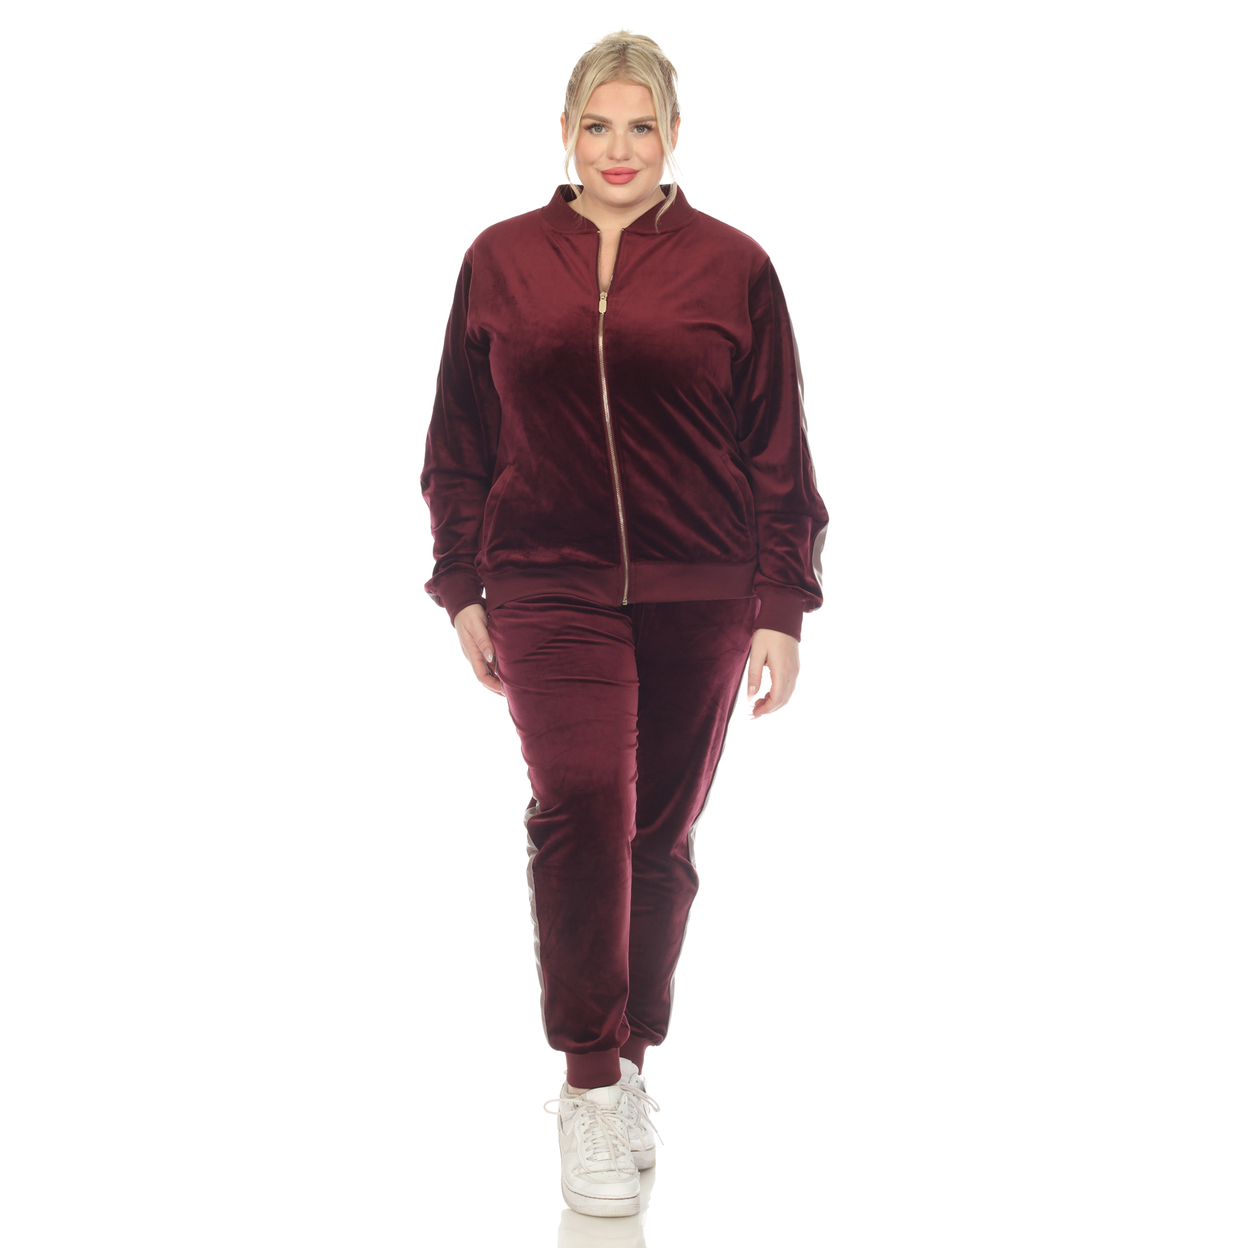 White Mark Women's 2-Piece Velour Tracksuit Set With Faux Leather Stripe - Burgundy, 1x